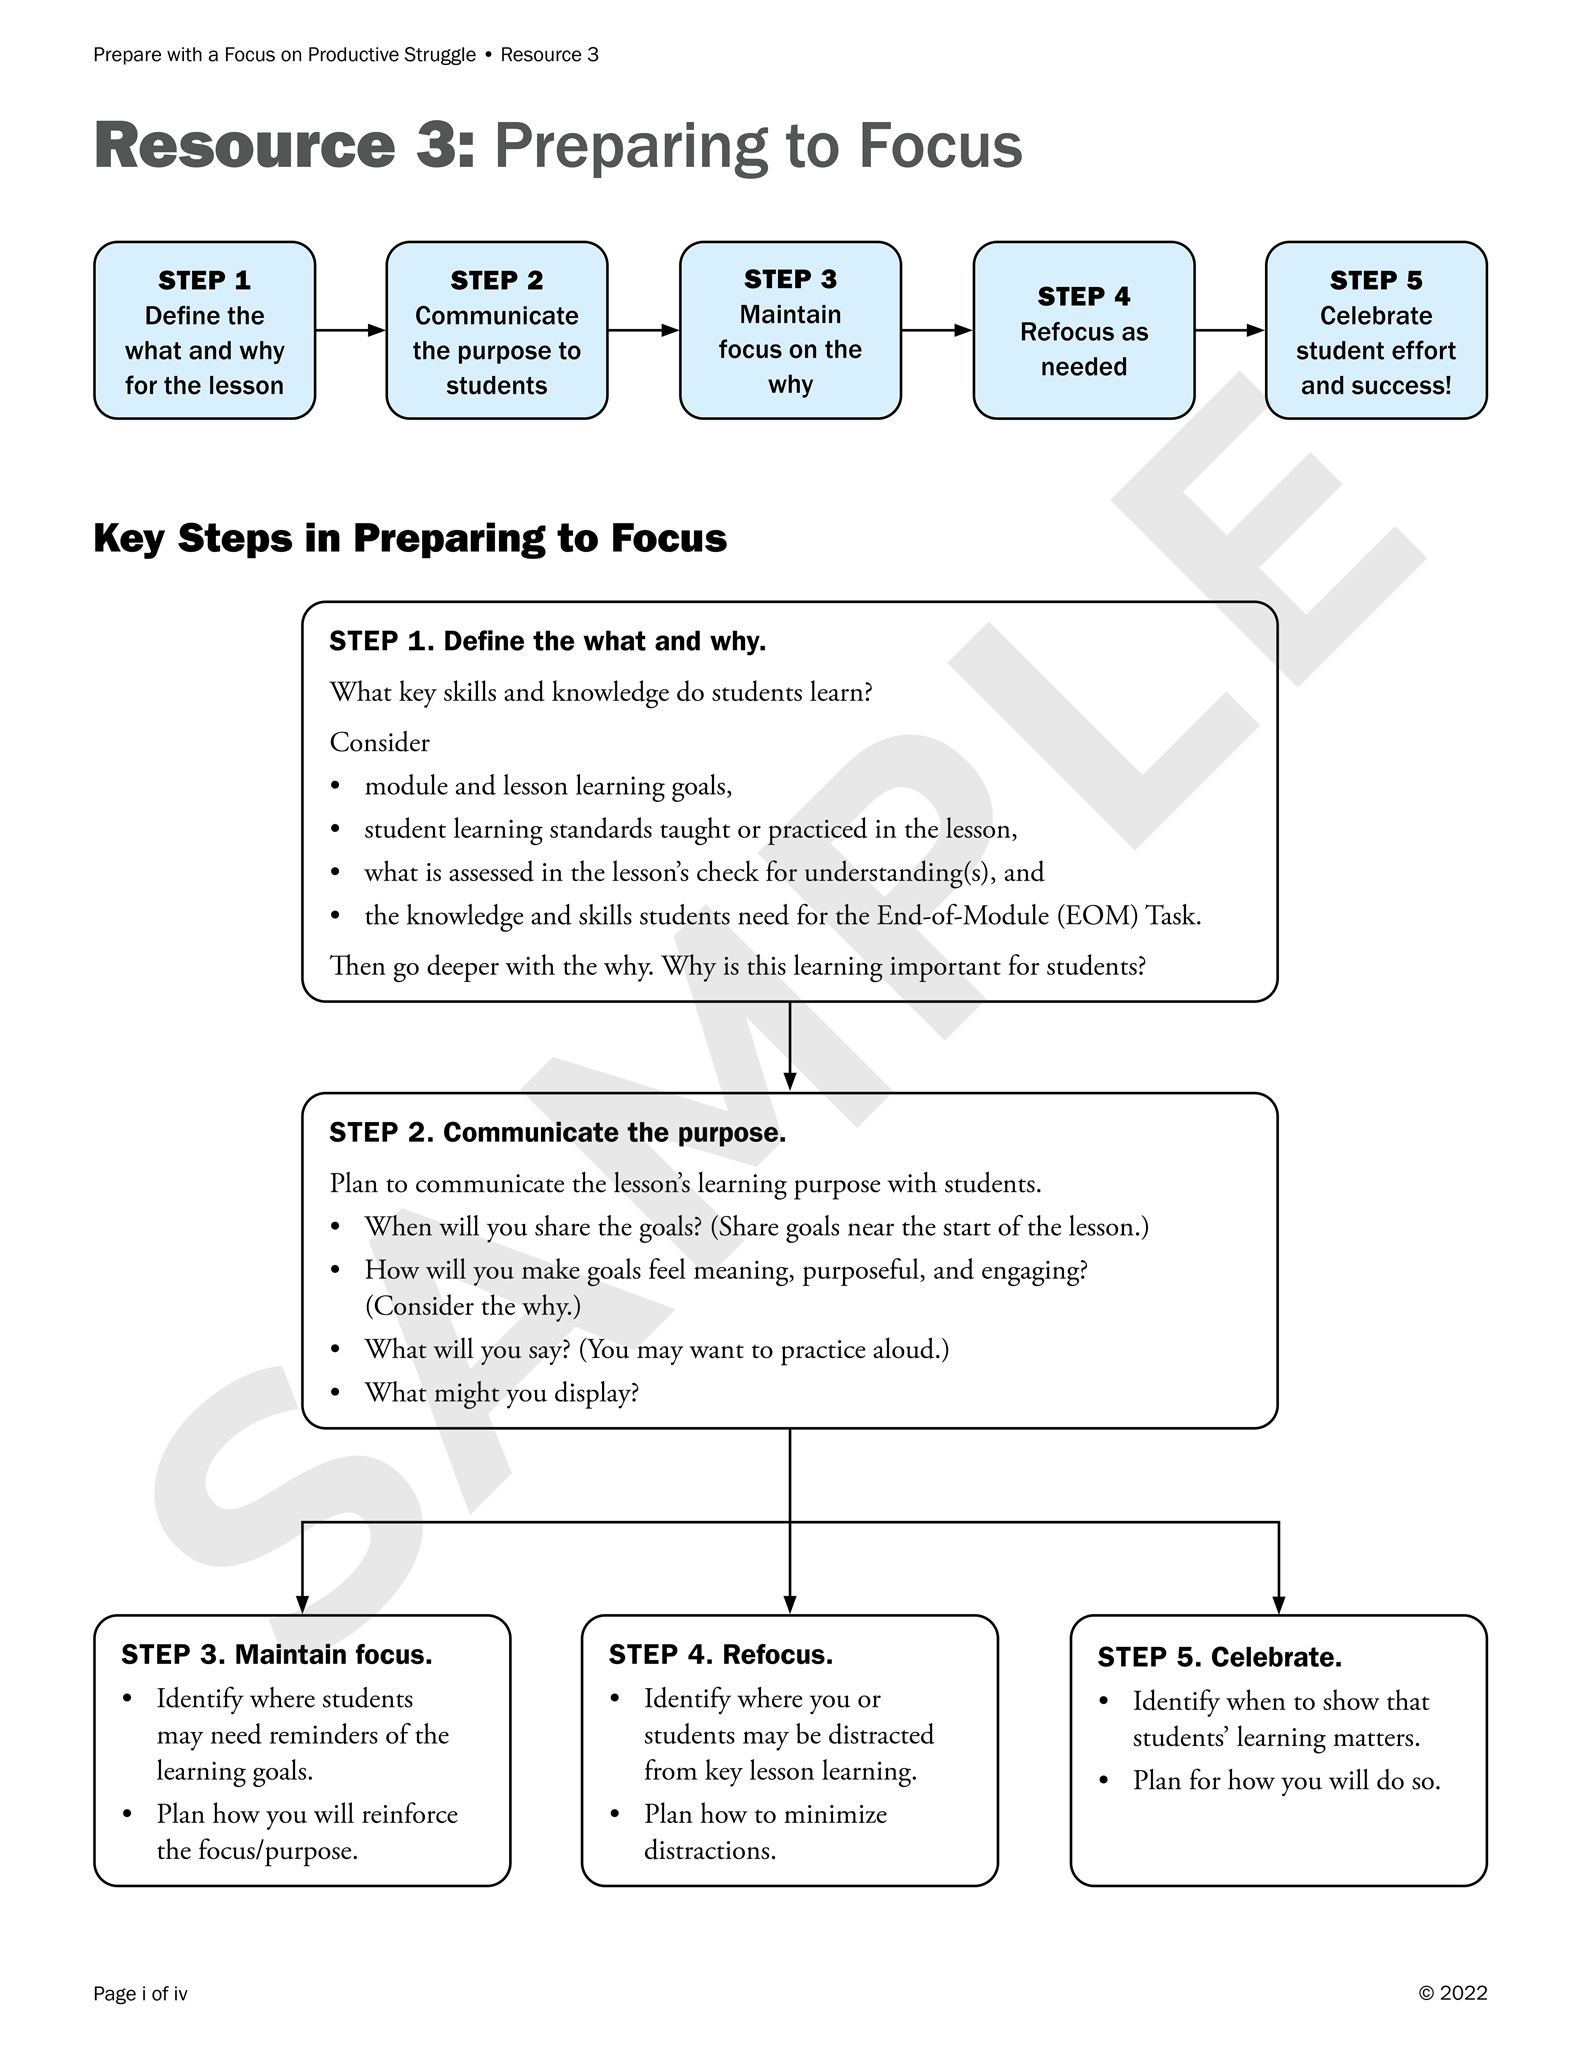 Page from a handout for a learning series for teachers. Two flow charts show the steps in preparing to focus students' learning. The first chart names and summarizes the steps: define the what and why, communicate the purpose, maintain focus, refocus, and celebrate. The second, larger, chart describes the steps using bullet points.